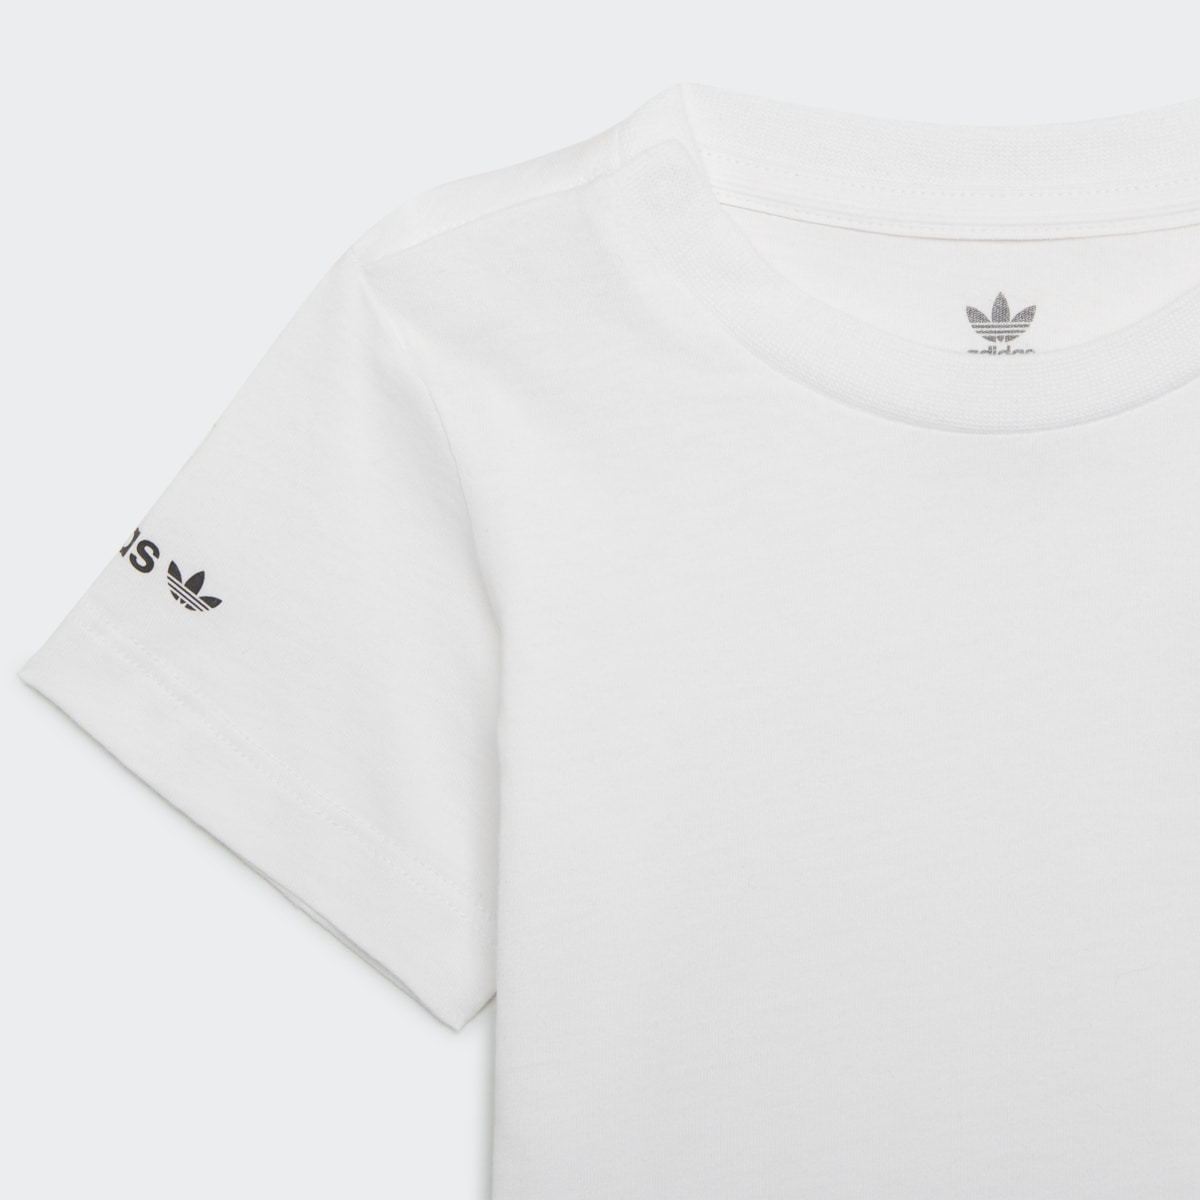 Adidas SPRT Collection Shorts and Tee Set. 8